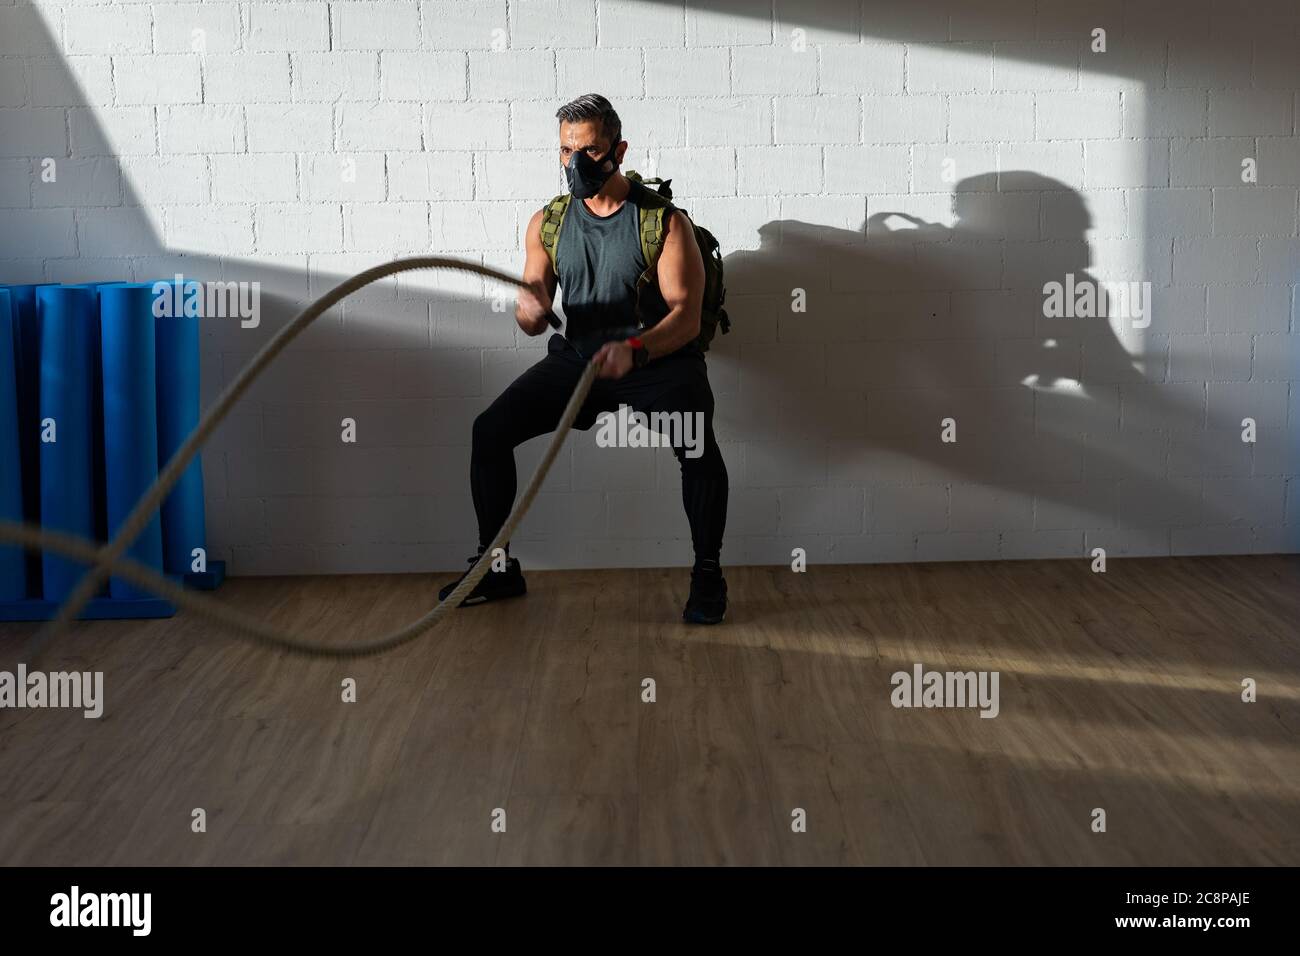 Sportsman at rope workout with training mask. Indoor on oak floor with sun and shadow. For boot camp concept. Stock Photo